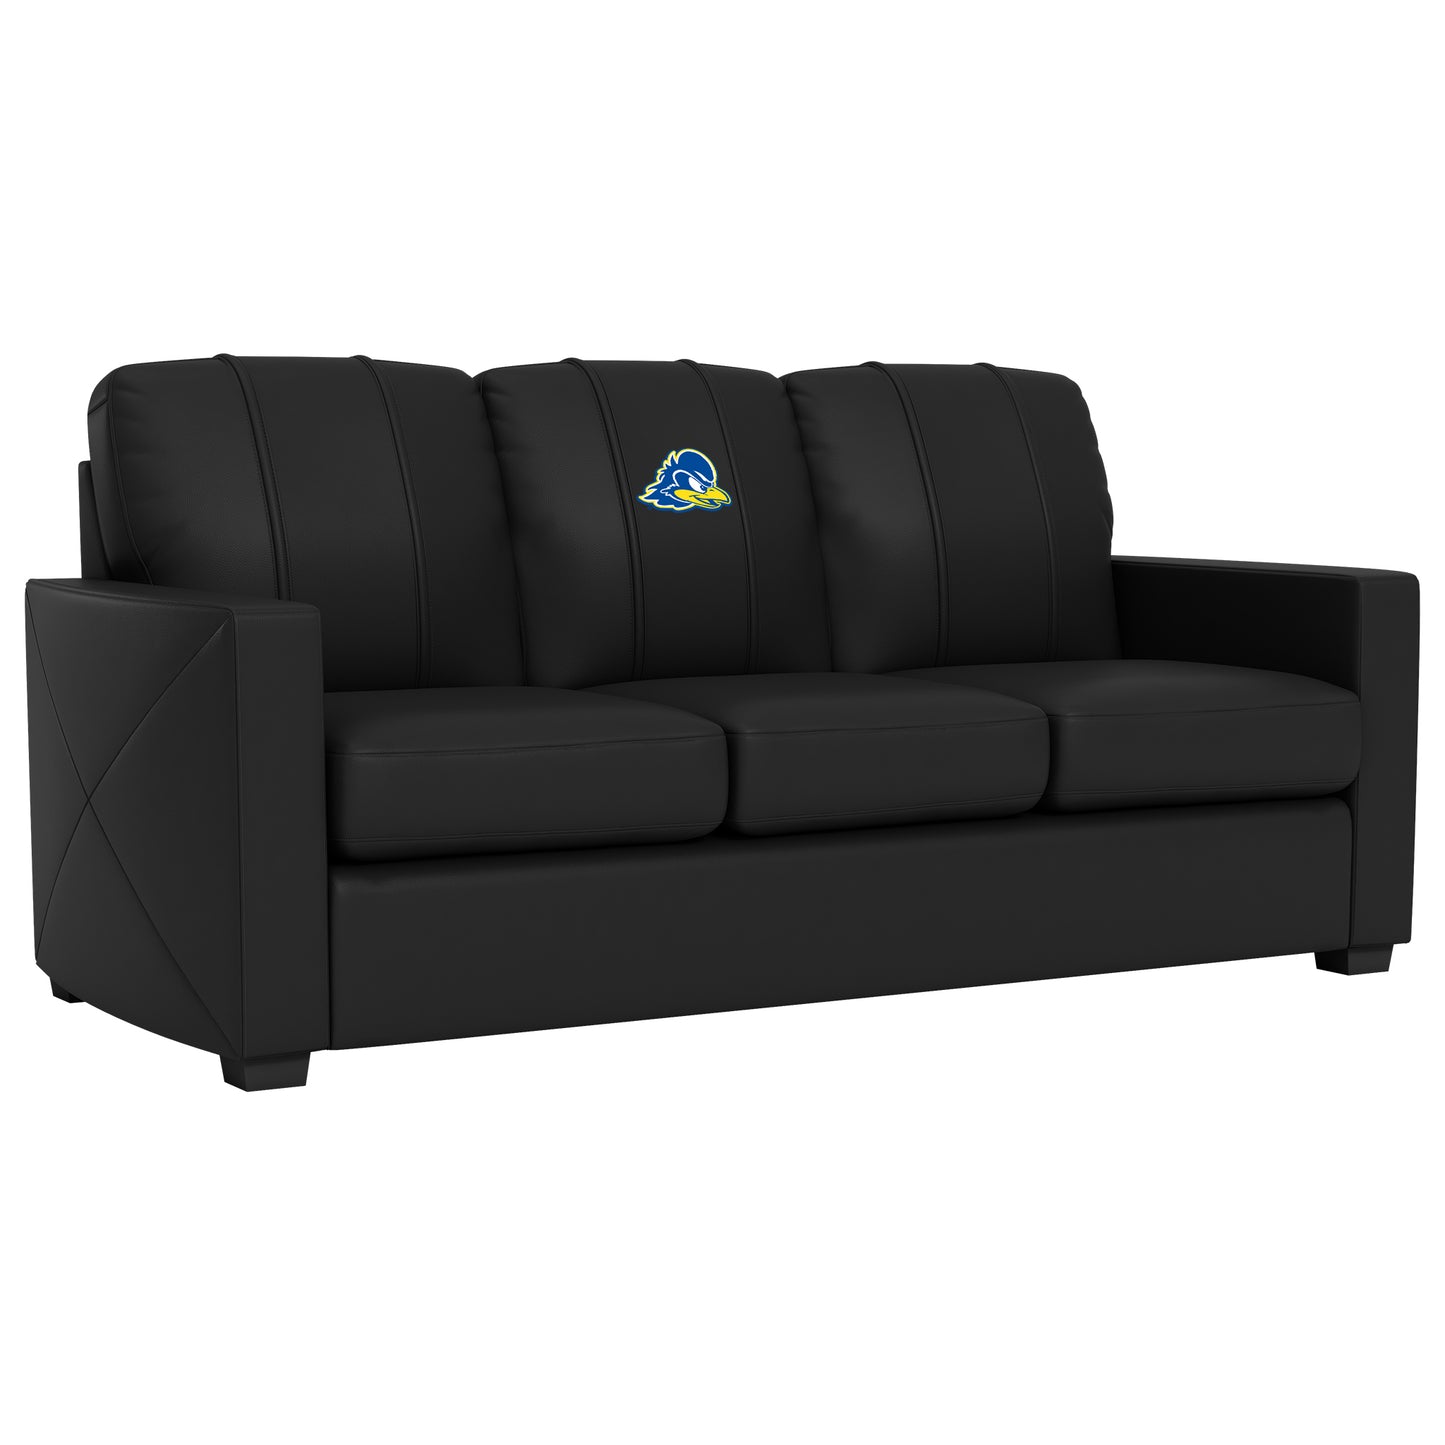 Silver Sofa with Delaware Blue Hens Logo